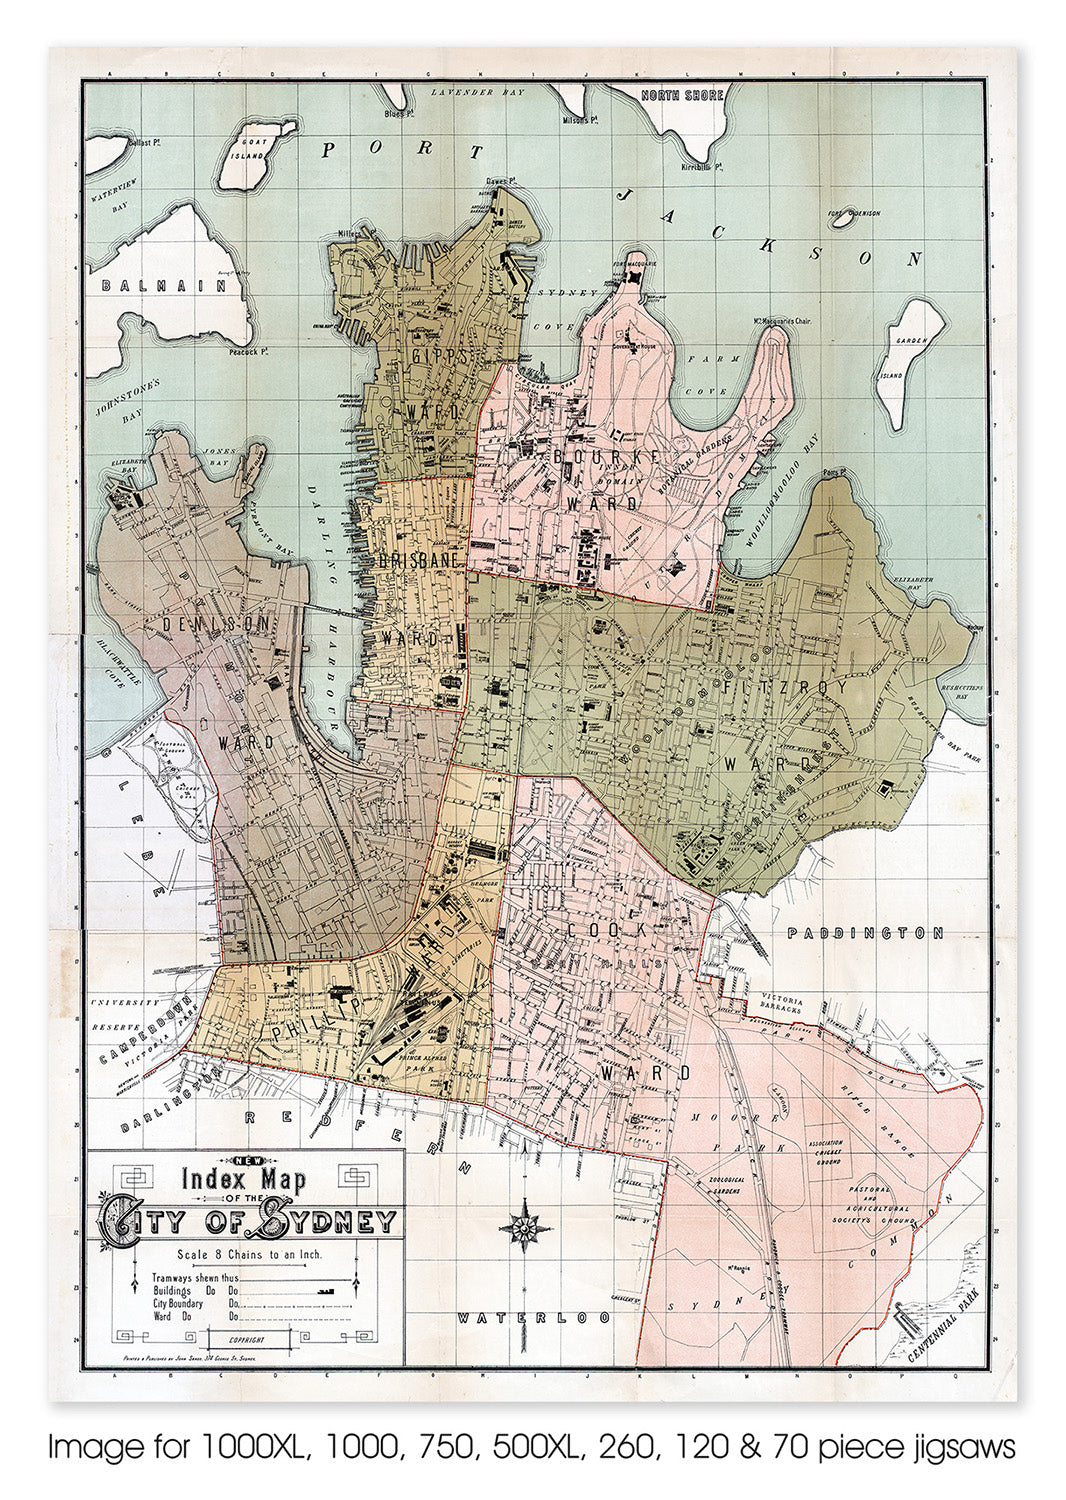 New Index Map of the City of Sydney, circa 1889